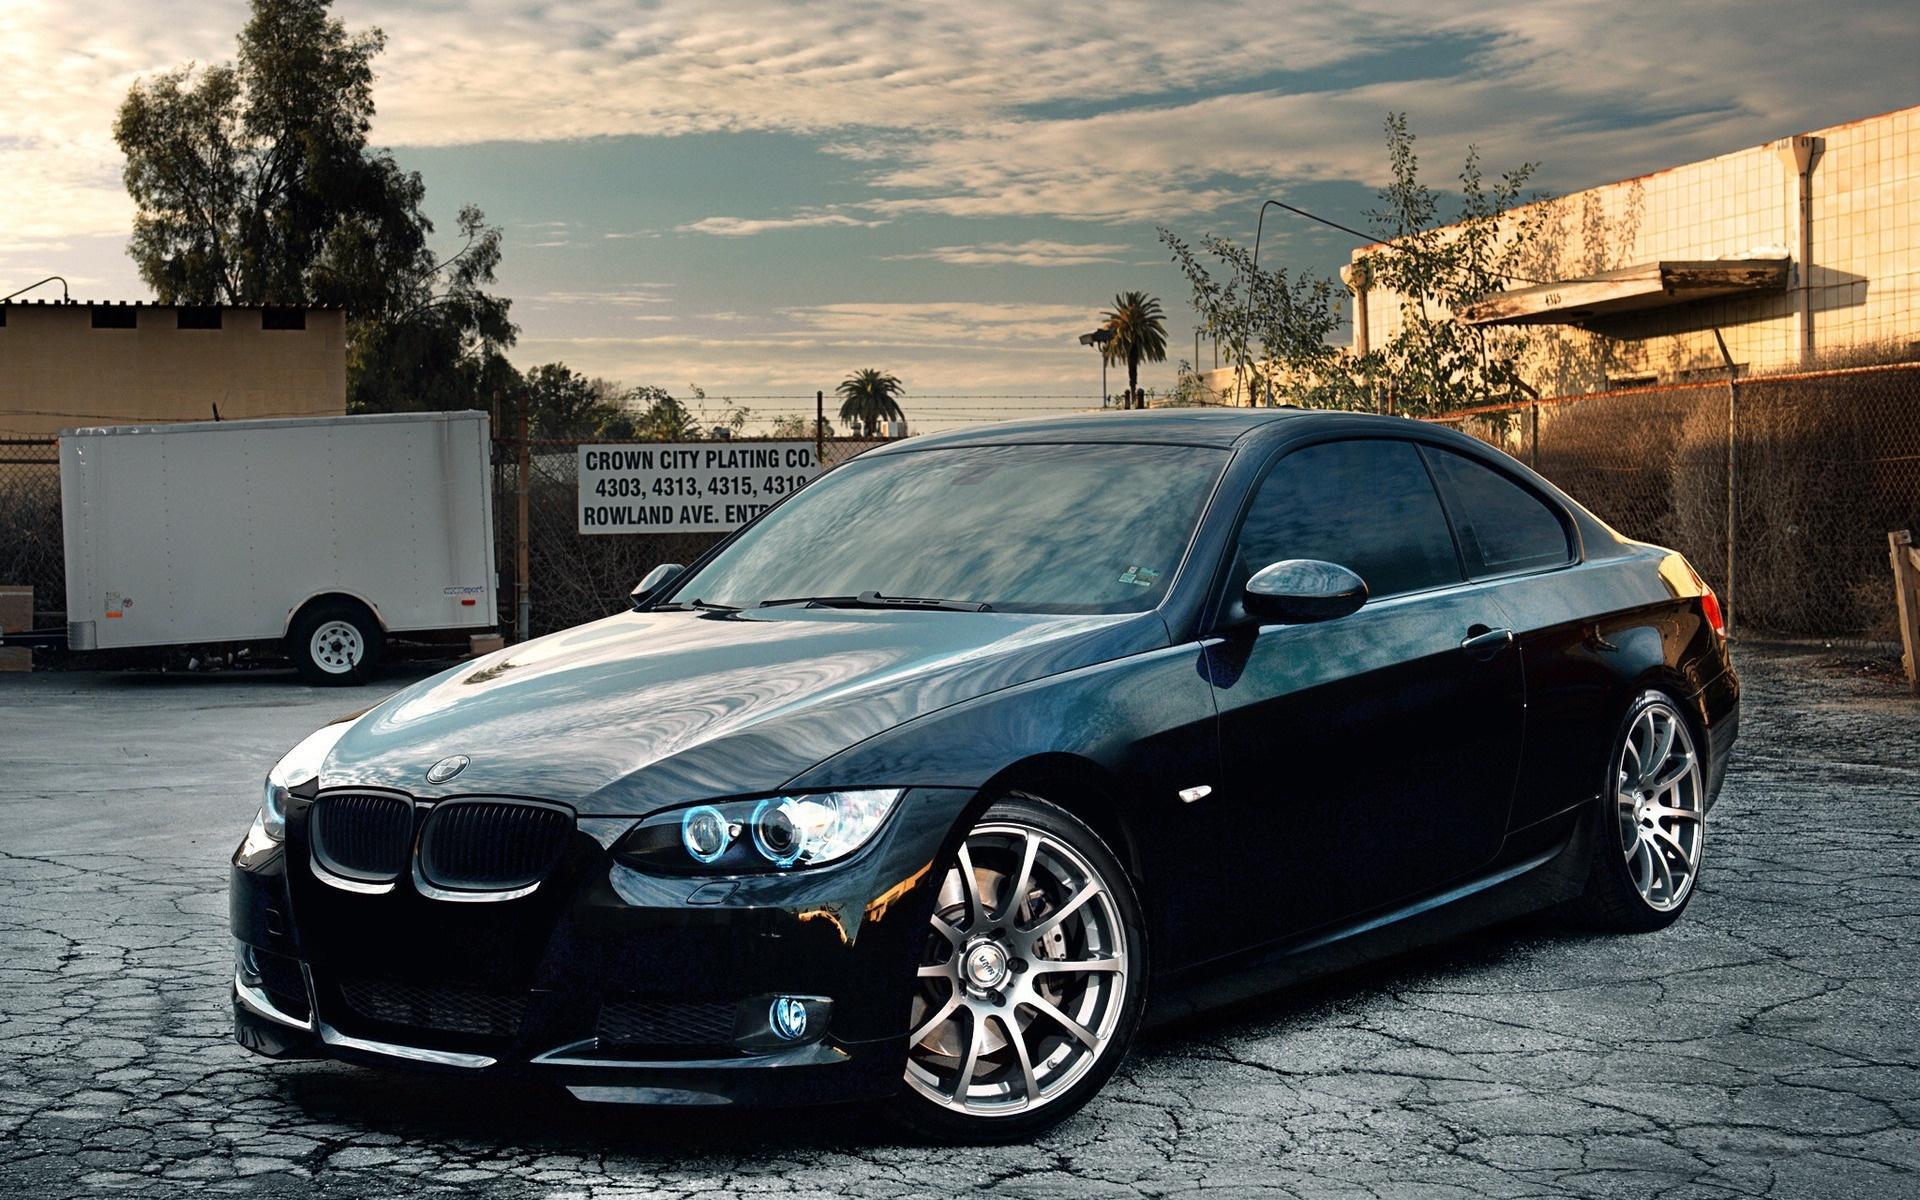 Full HD BMW Wallpapers - Top Free Full HD BMW Backgrounds - WallpaperAccess